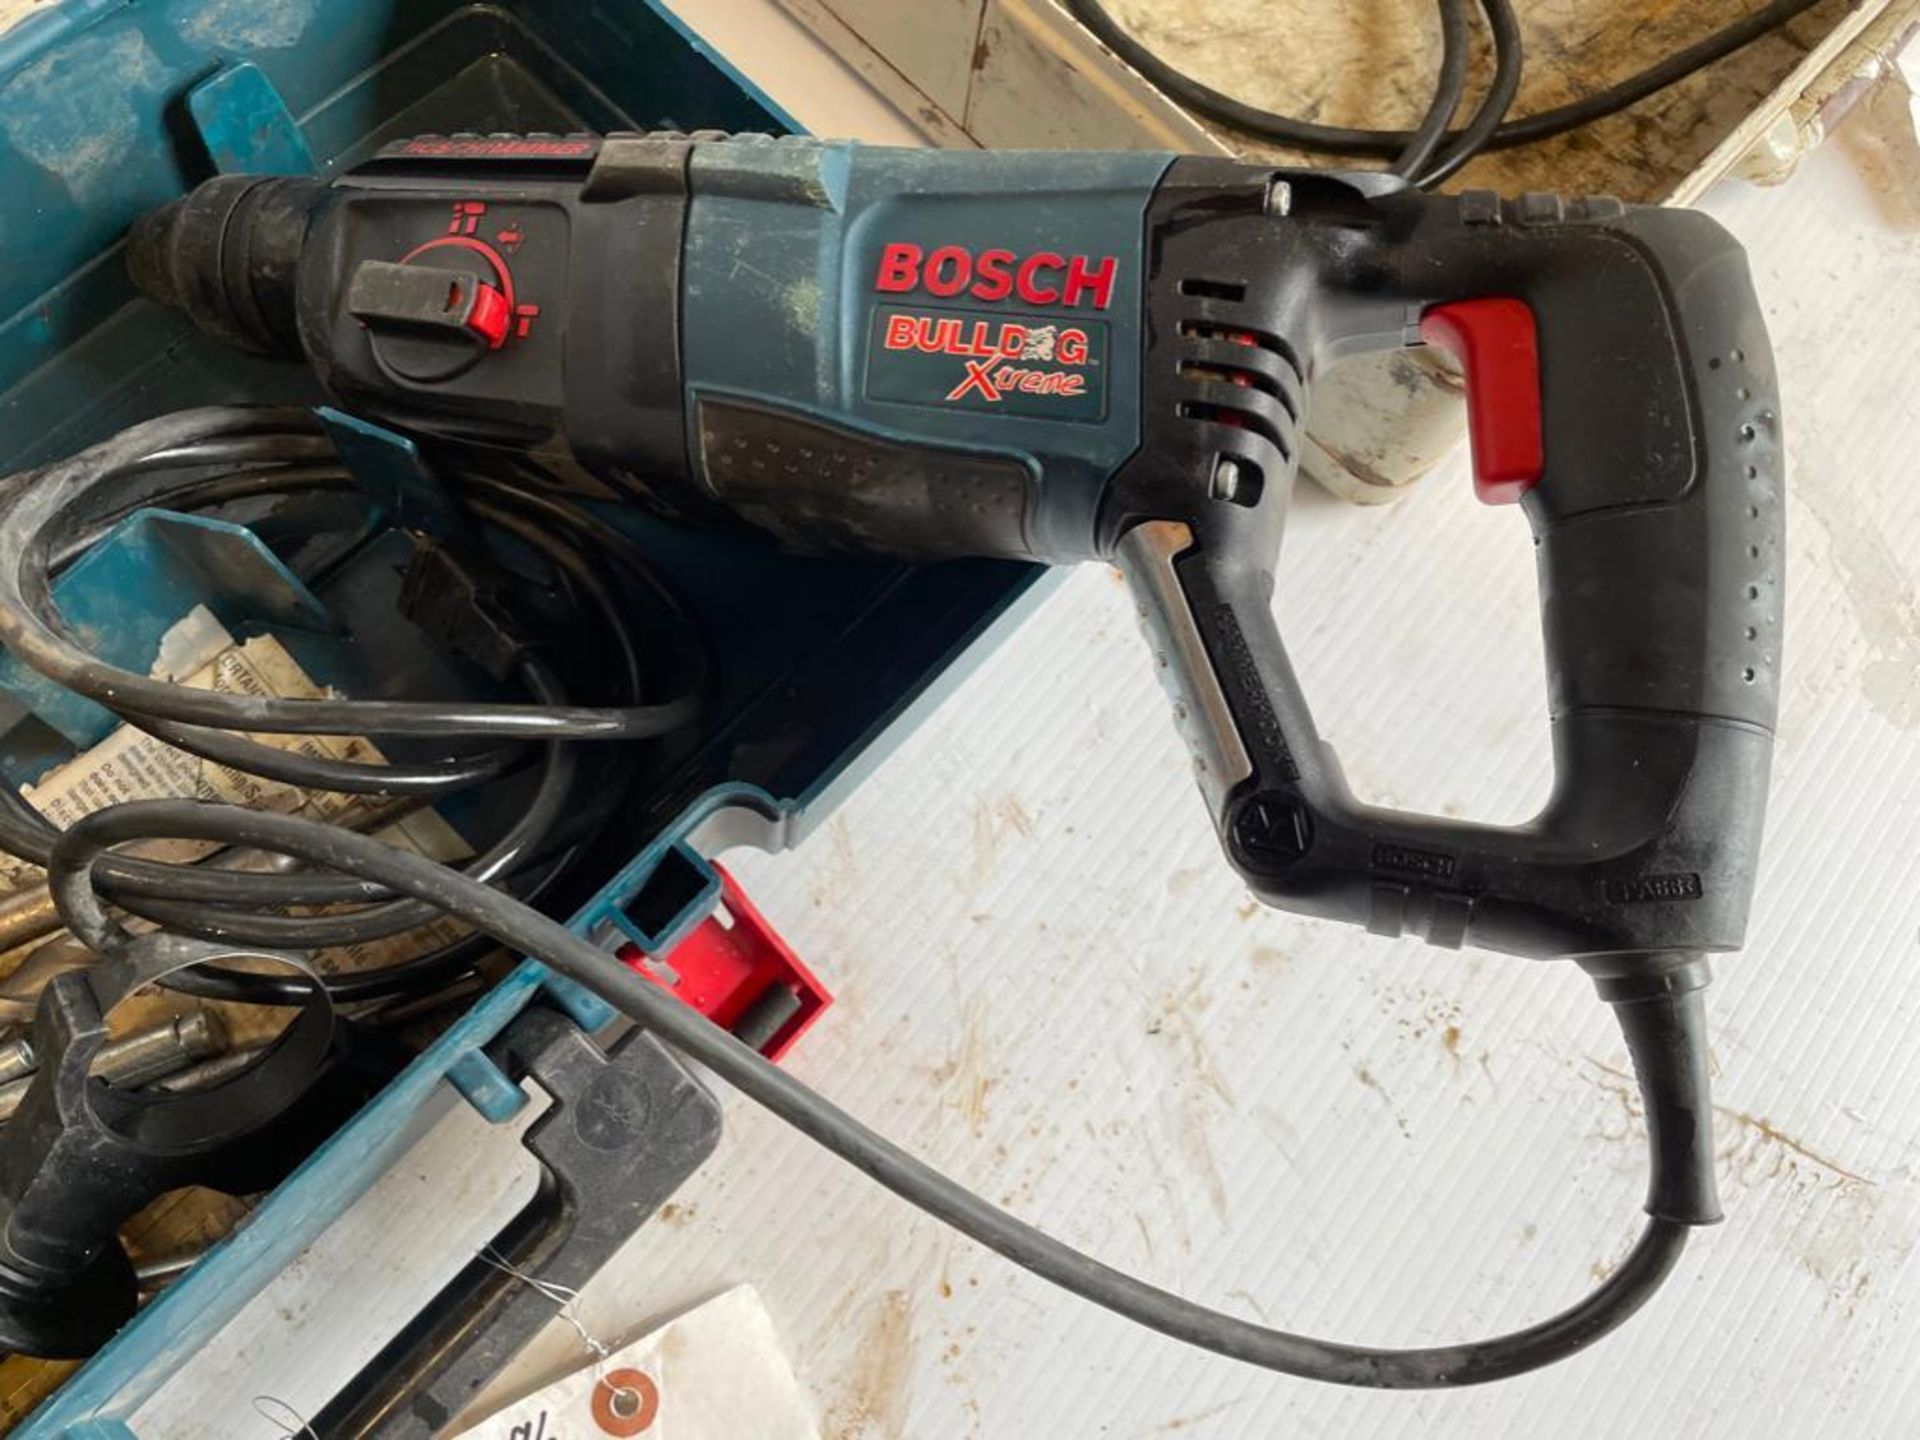 Bosch Bulldog Xtreme Variable Speed Hammer Drill, 120 V. Located in Hazelwood, MO - Image 6 of 6